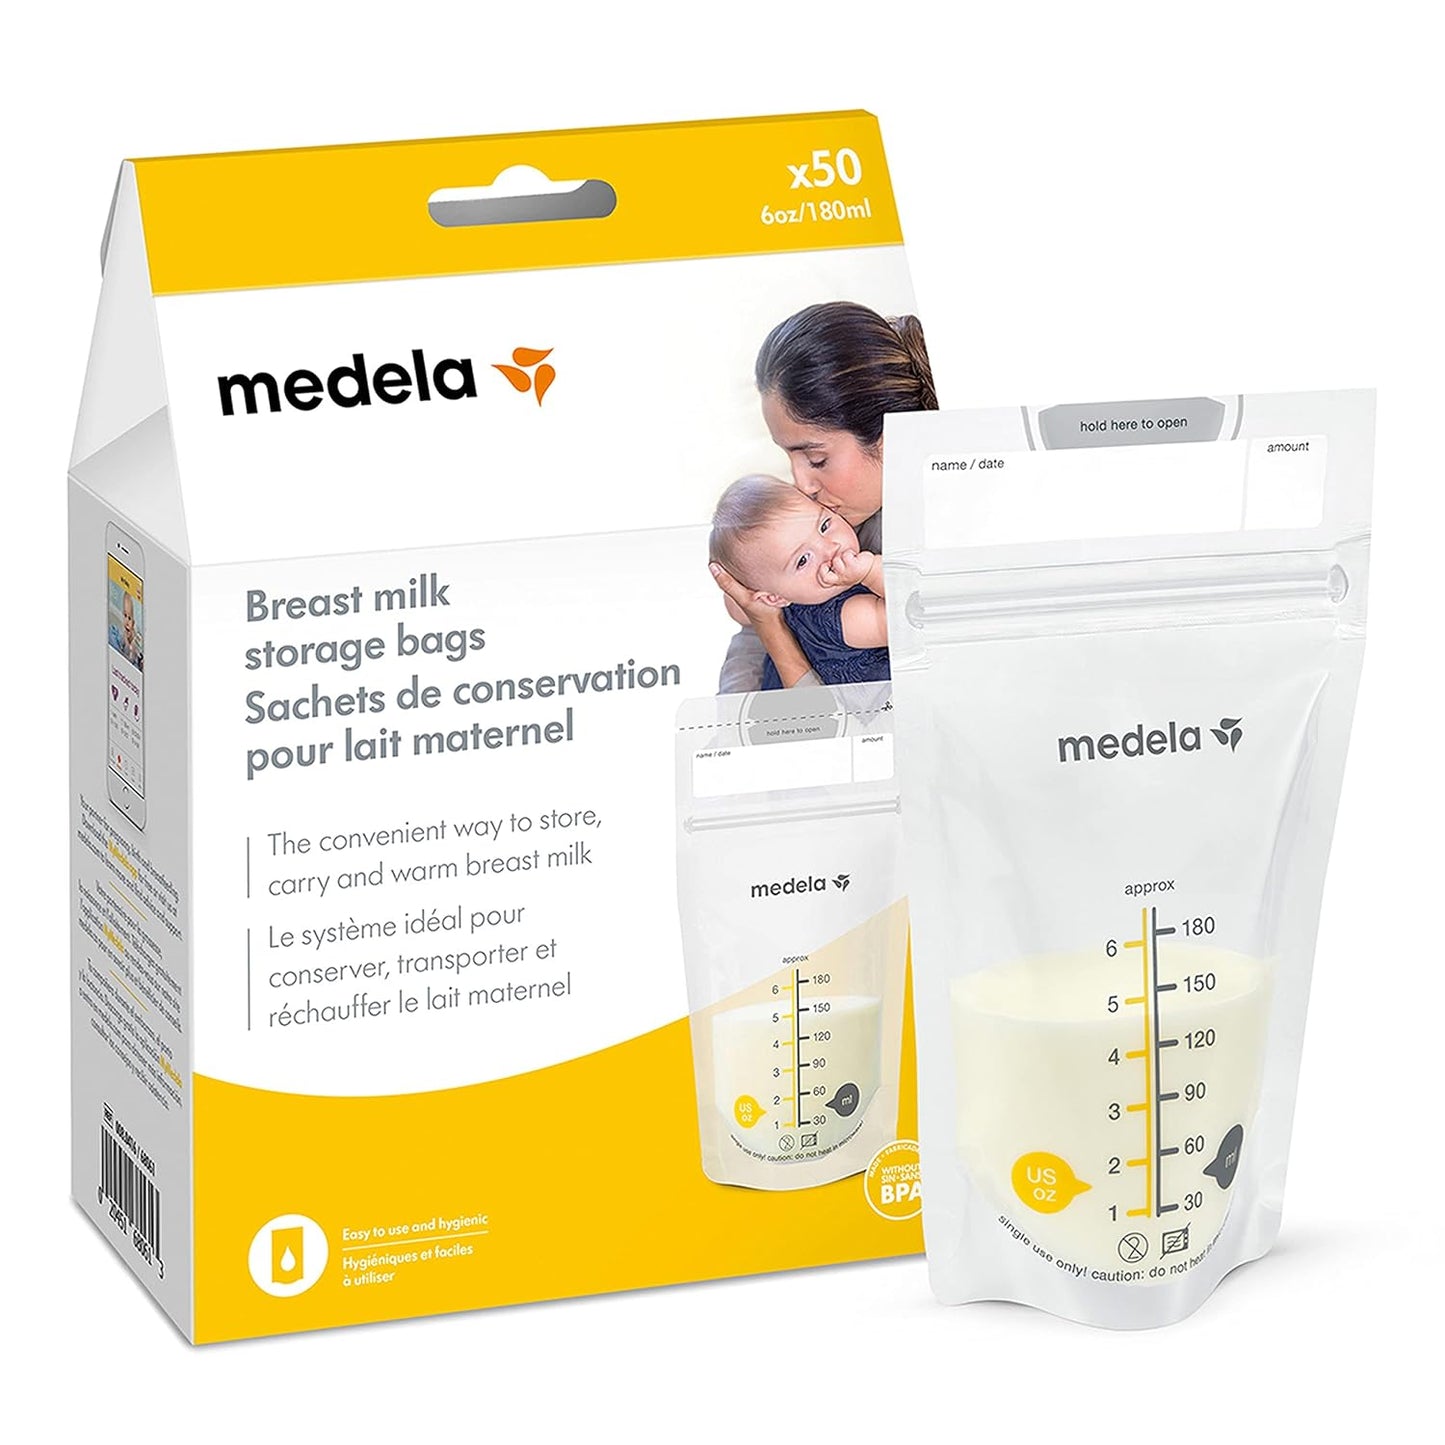 Medela Breast Milk Storage Bags, 100 Count, Ready to Use Breastmilk Bags for Breastfeeding, Self Standing Bag, Space Saving Flat Profile, Hygienically Pre-Sealed, White, 6 Ounce